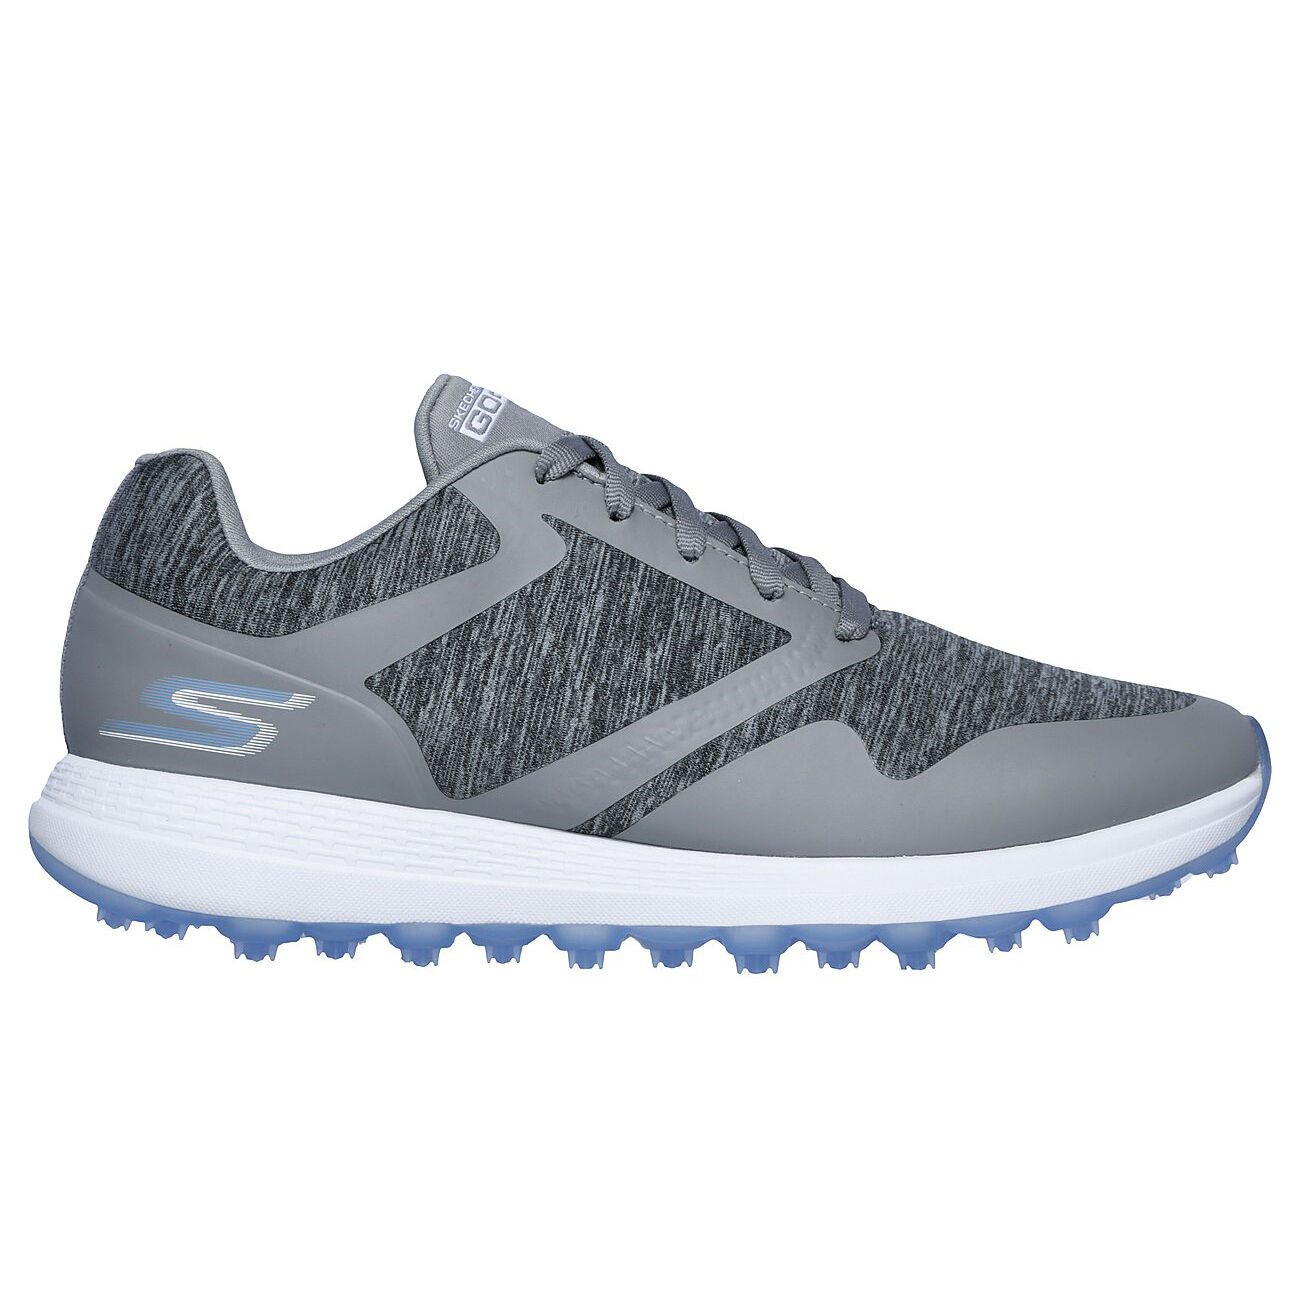 skechers go golf max shoes